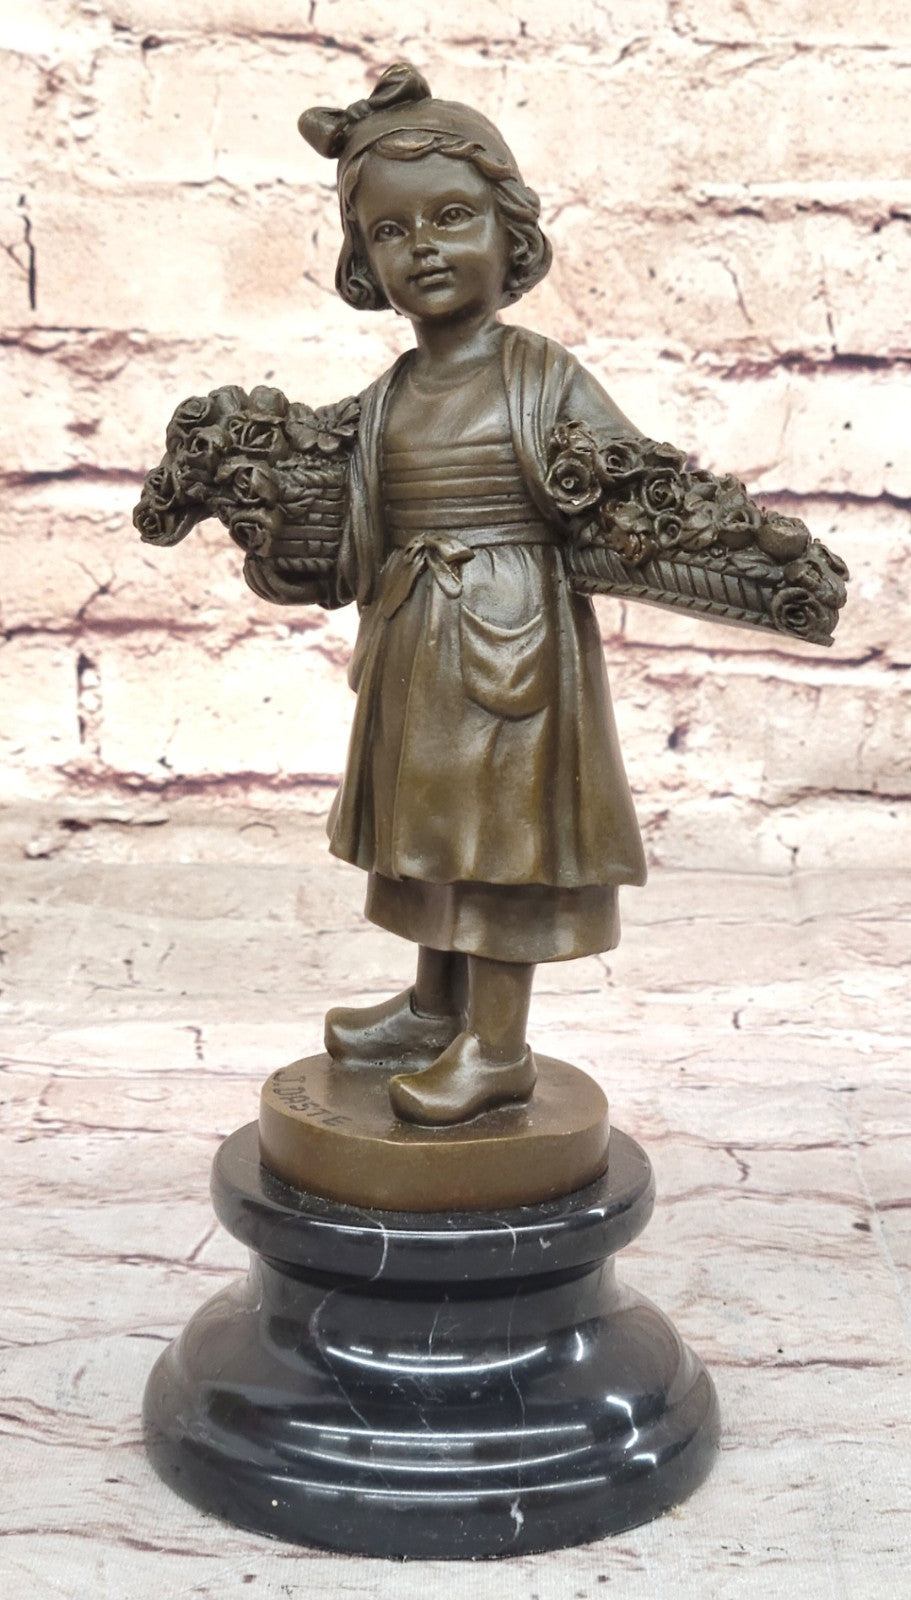 Signed Daste Art: Young Girl Figurine, Handcrafted Bronze Statue for Home Office